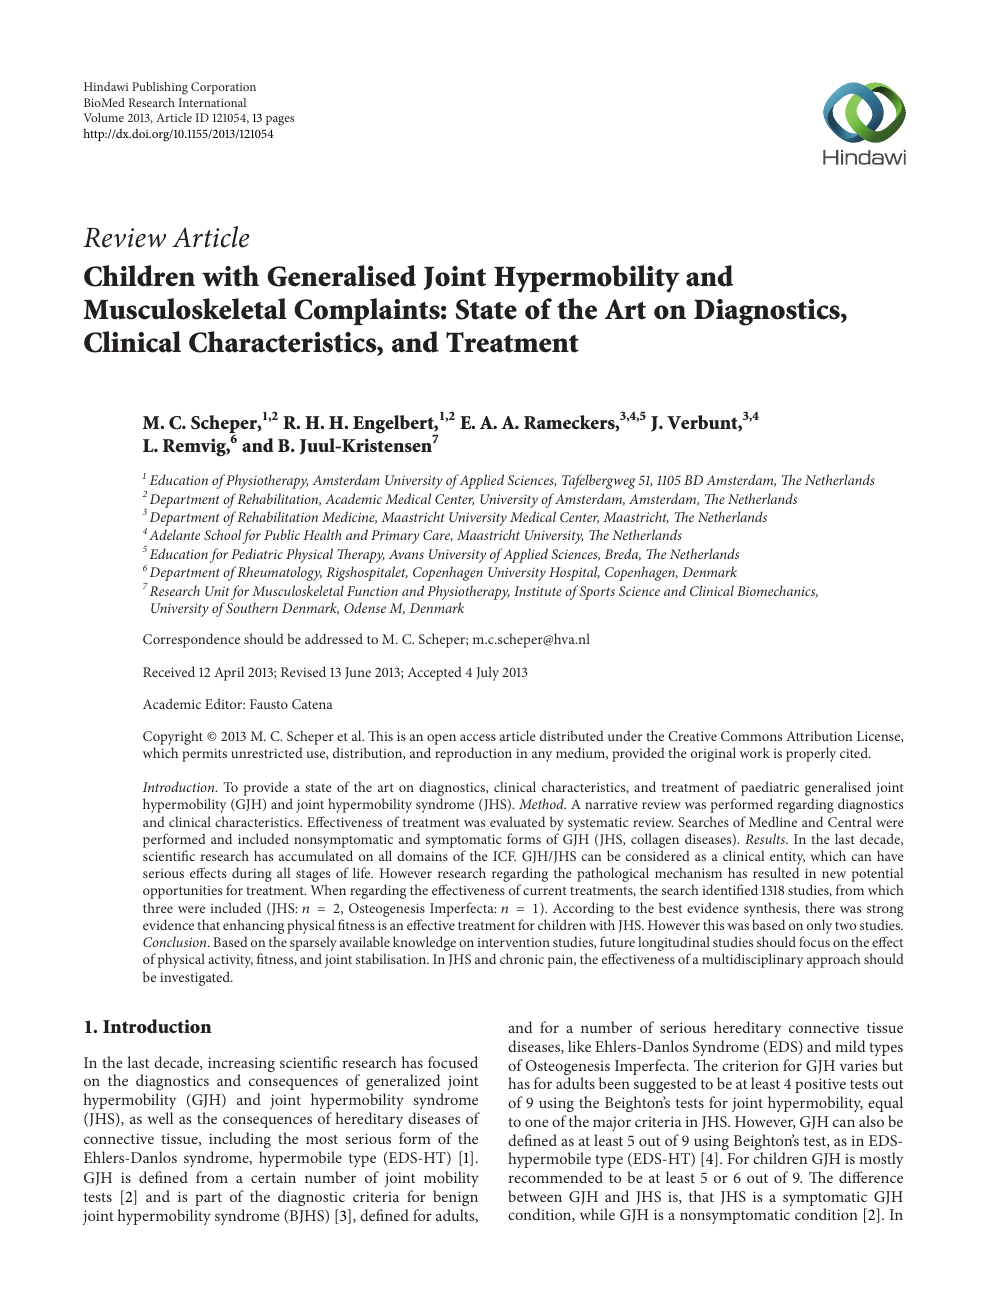 Joint hypermobility syndrome: A review for clinicians - Pacey - 2015 -  Journal of Paediatrics and Child Health - Wiley Online Library